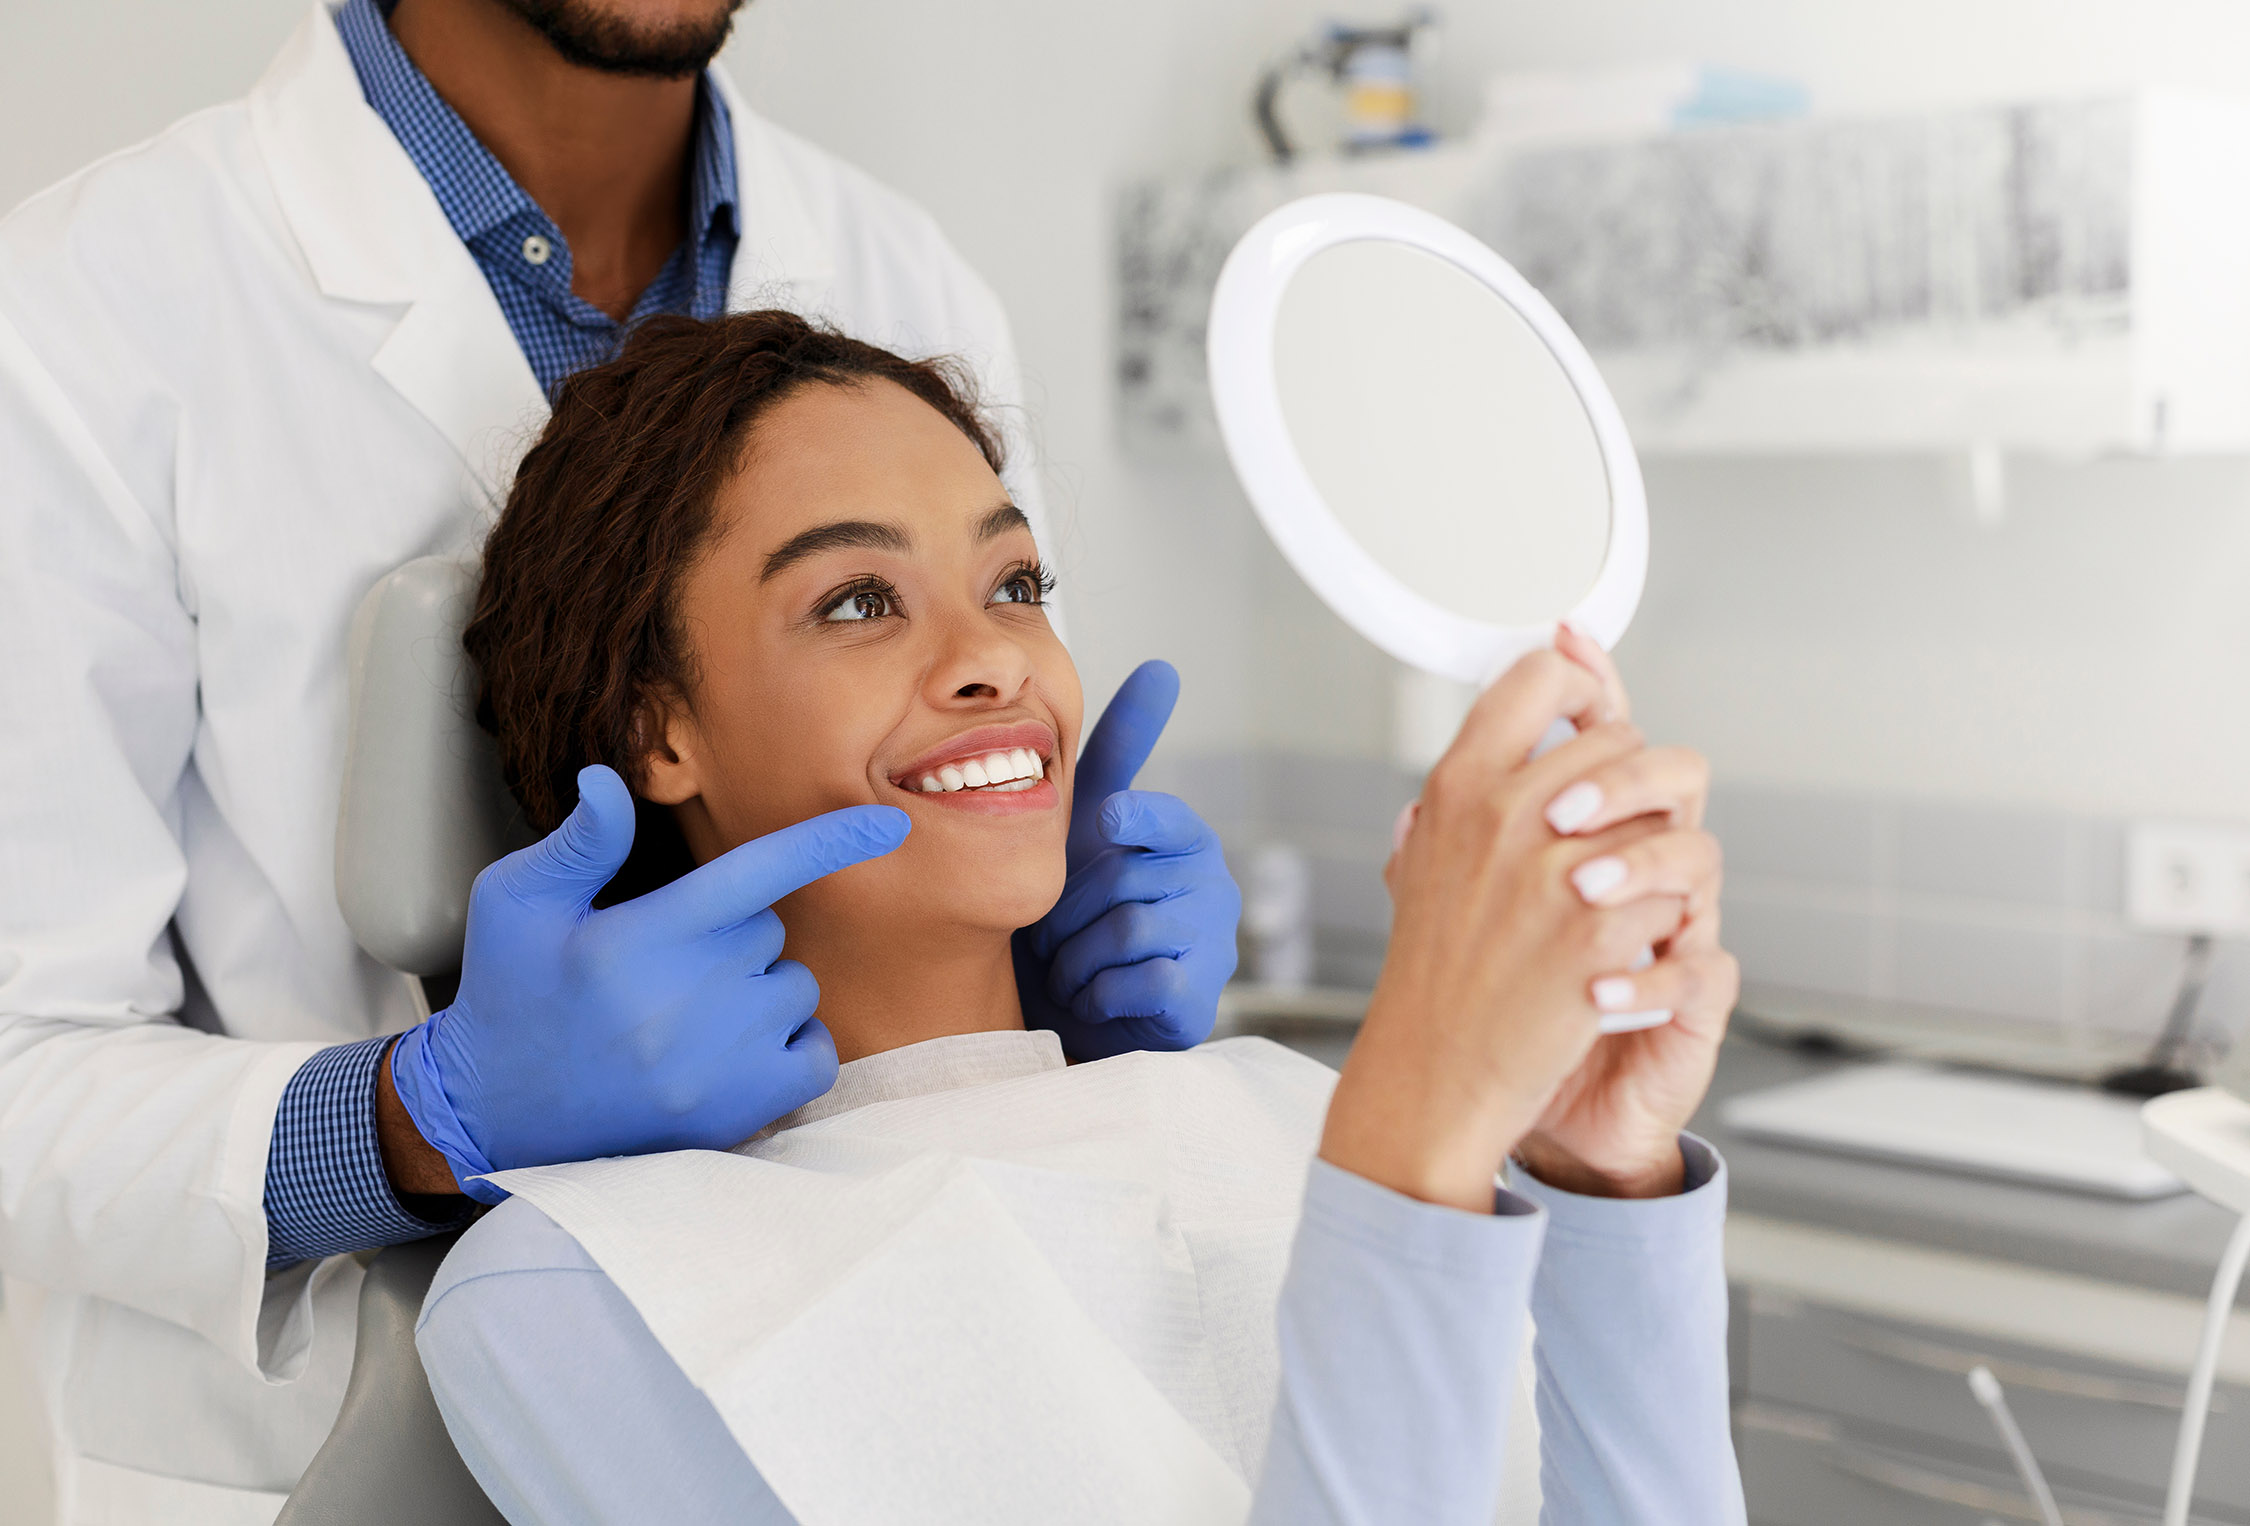 Types of Teeth Whitening: What’s the Best for You?